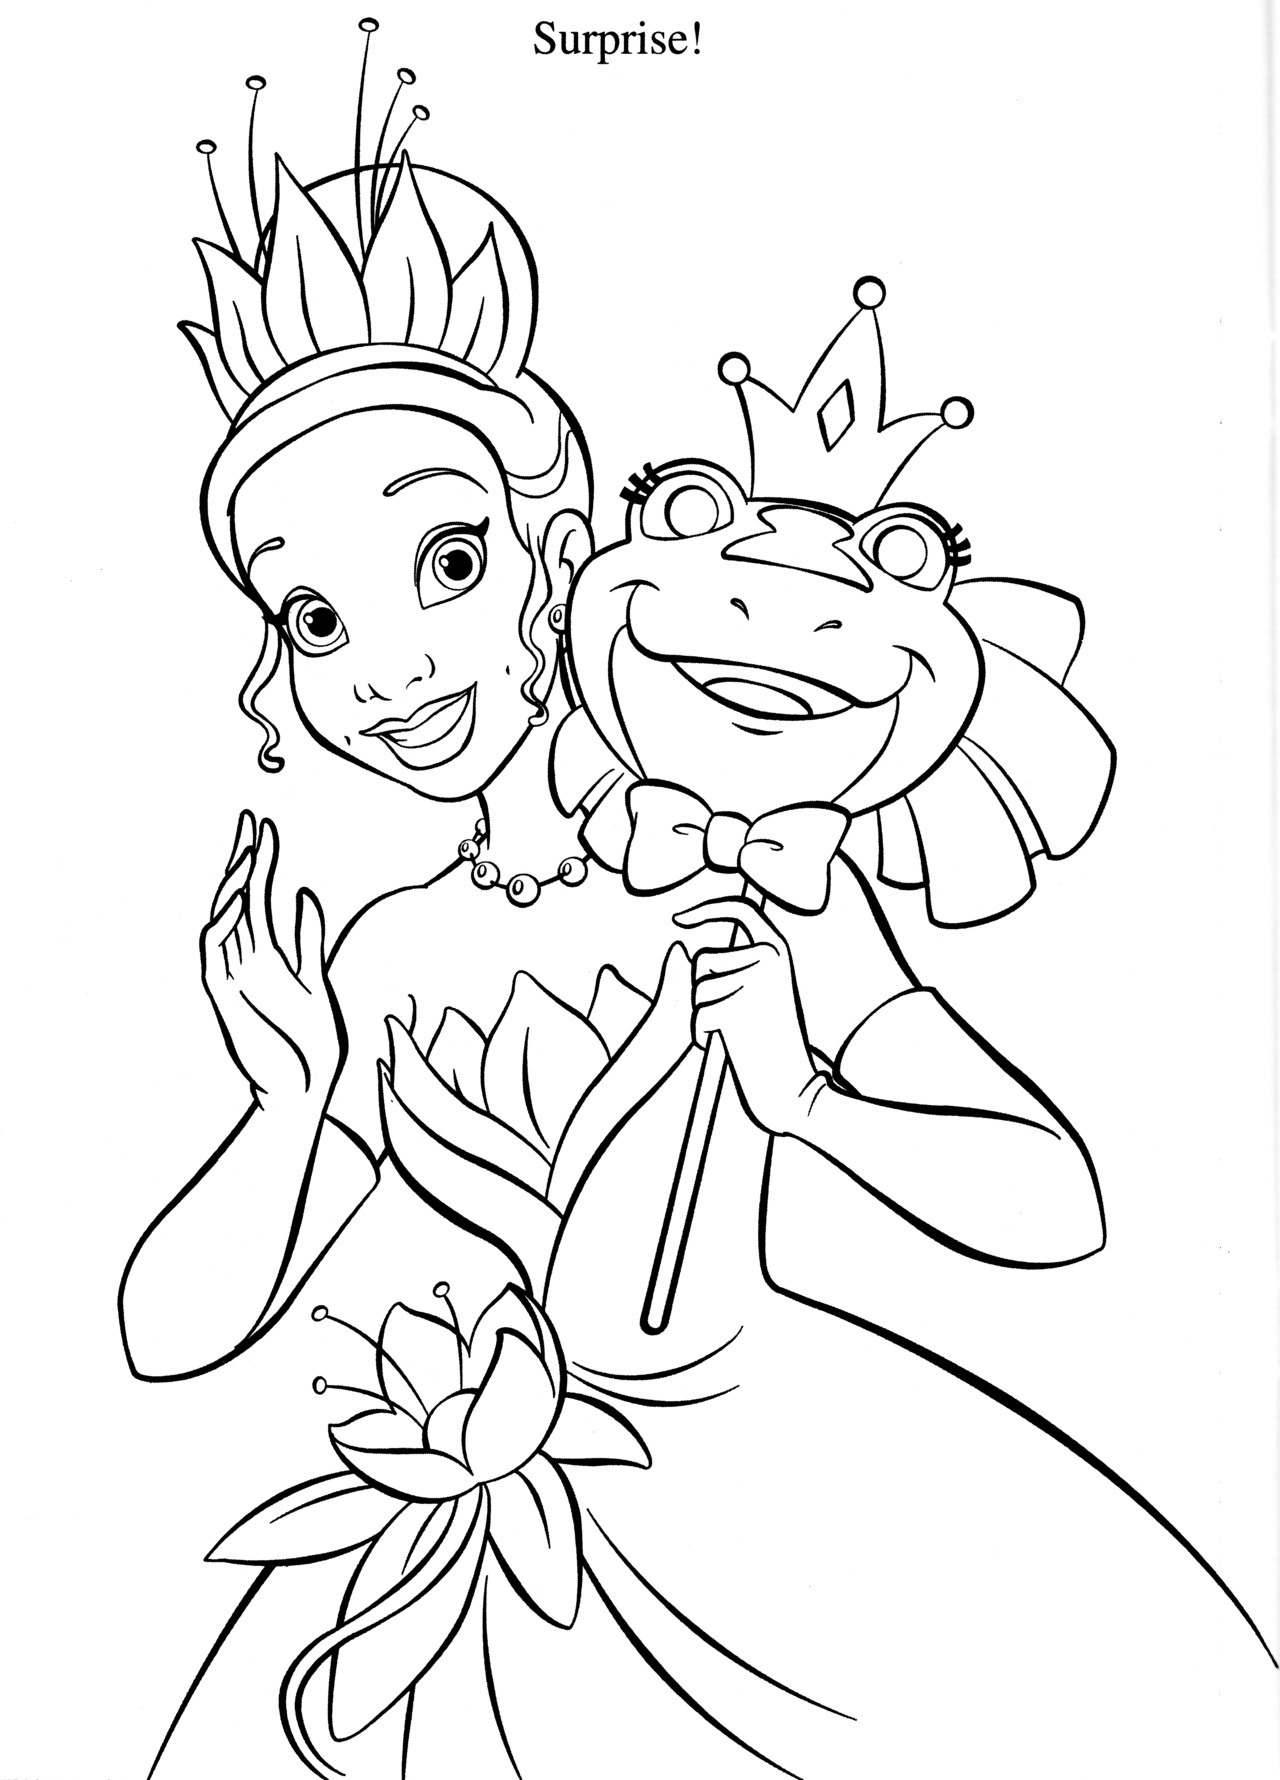 Printable Princess Tiana Coloring Pages For Kids Cool2bkids Images